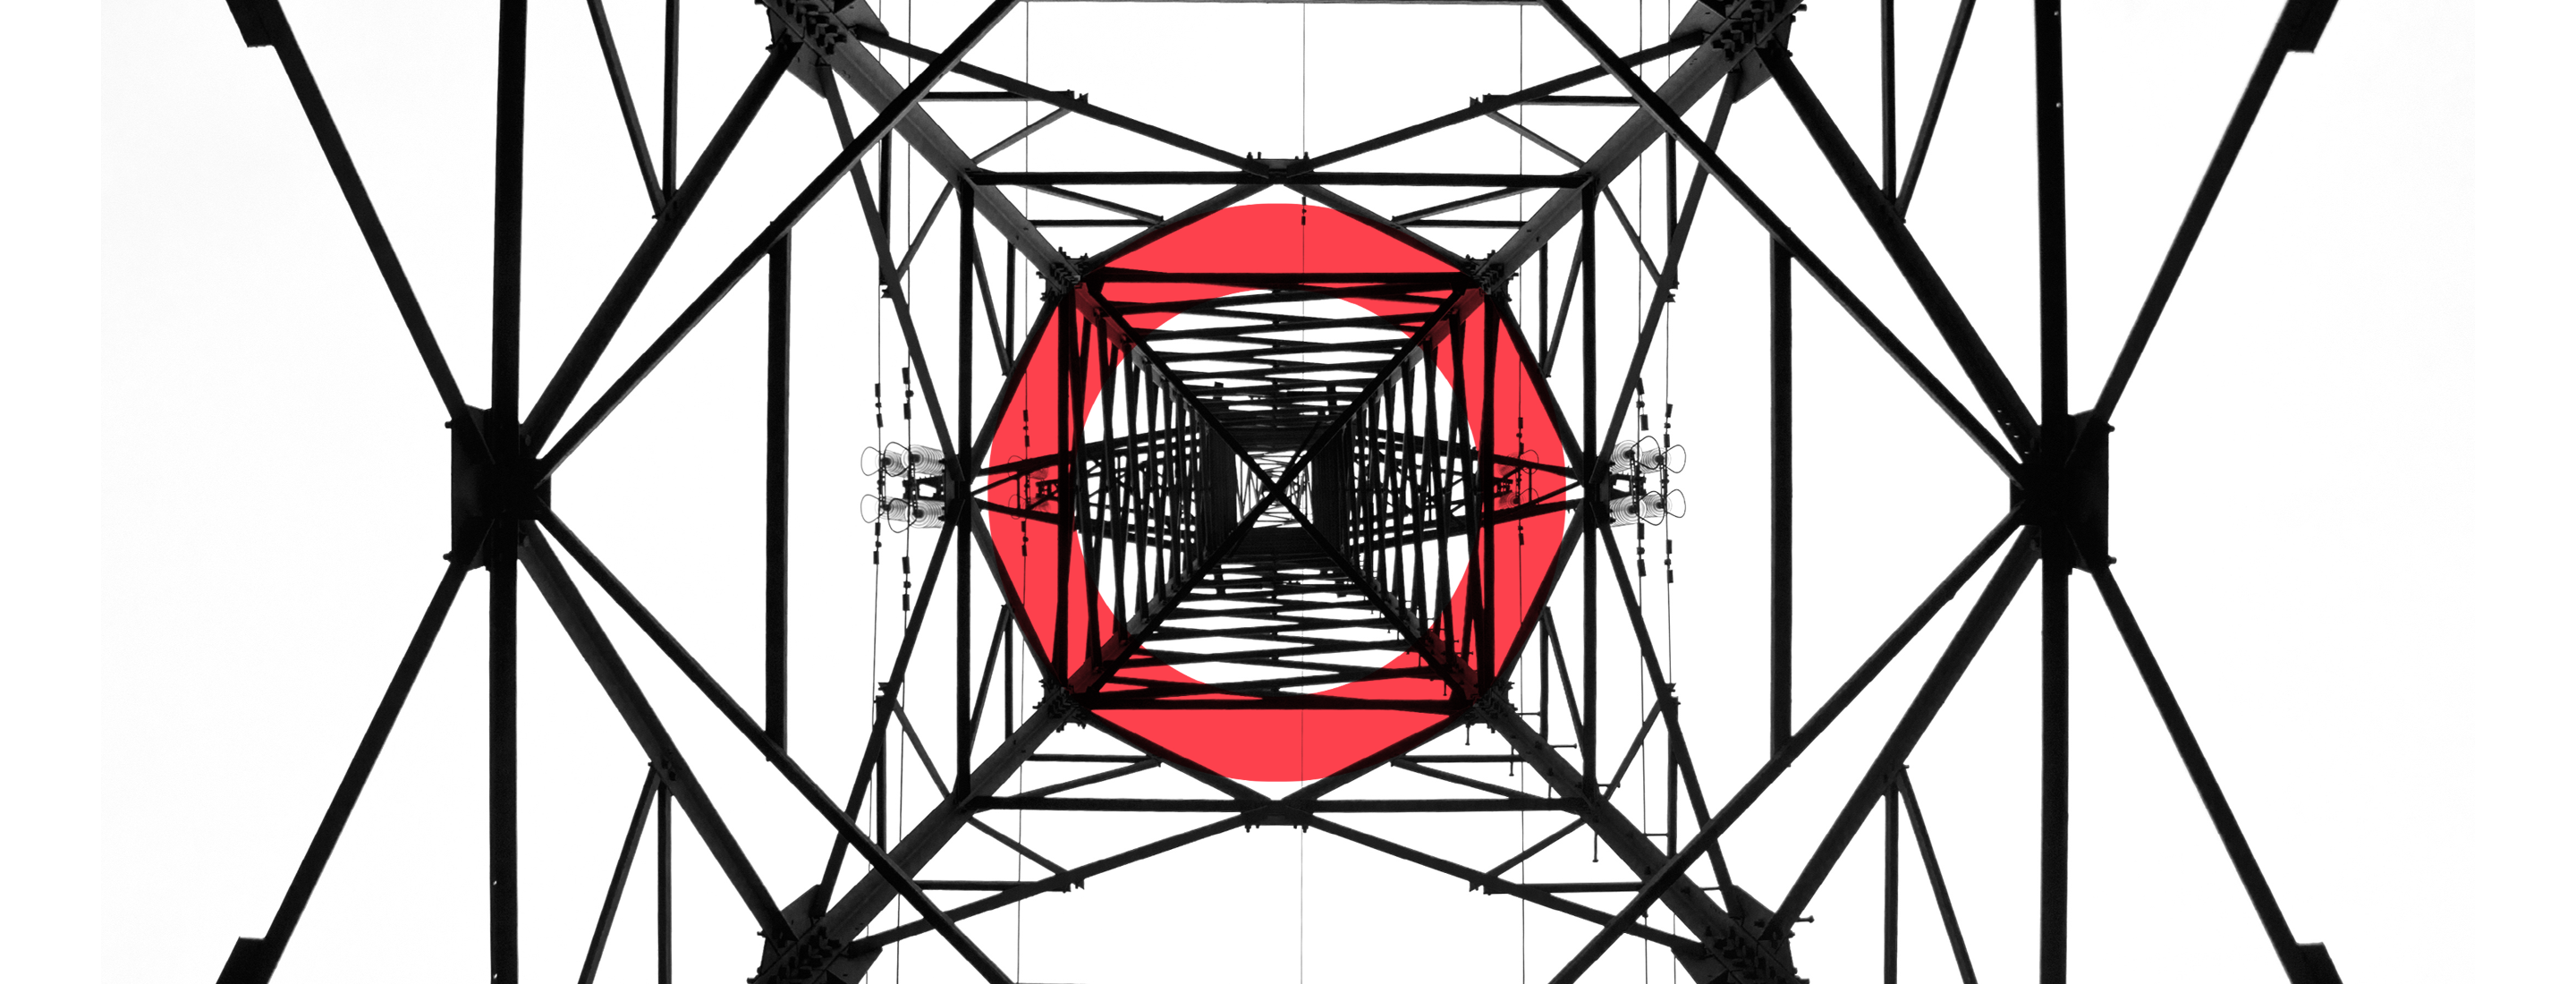 Pattern of linked geometrical shapes forms a bottom-to-top perspective within transmission tower